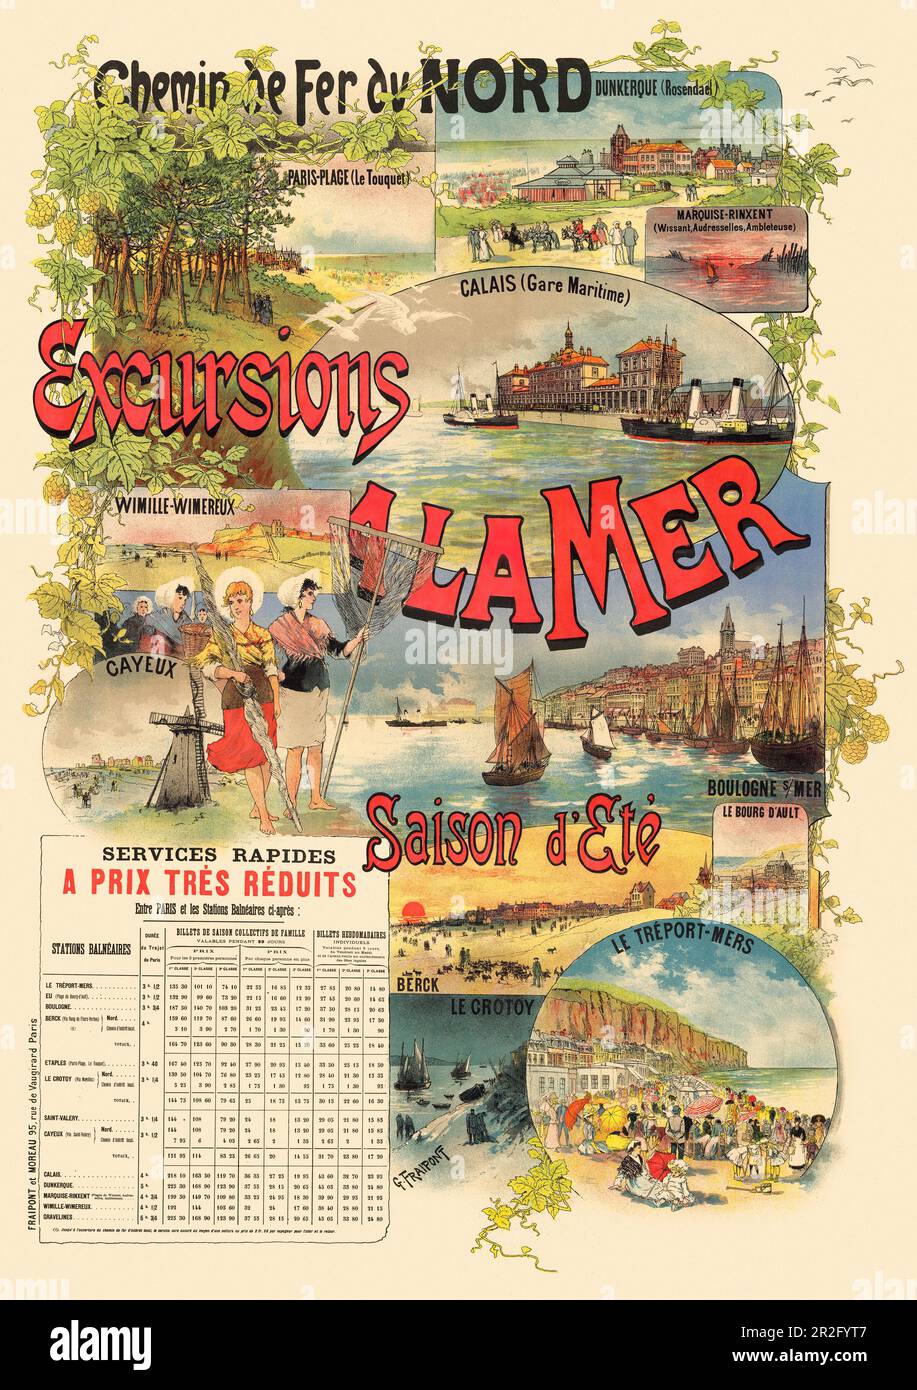 Chemin de Fer du Nord. Excursions à la mer by Gustave Fraipont (1849-1923). Poster published in 1891 in France. Stock Photo